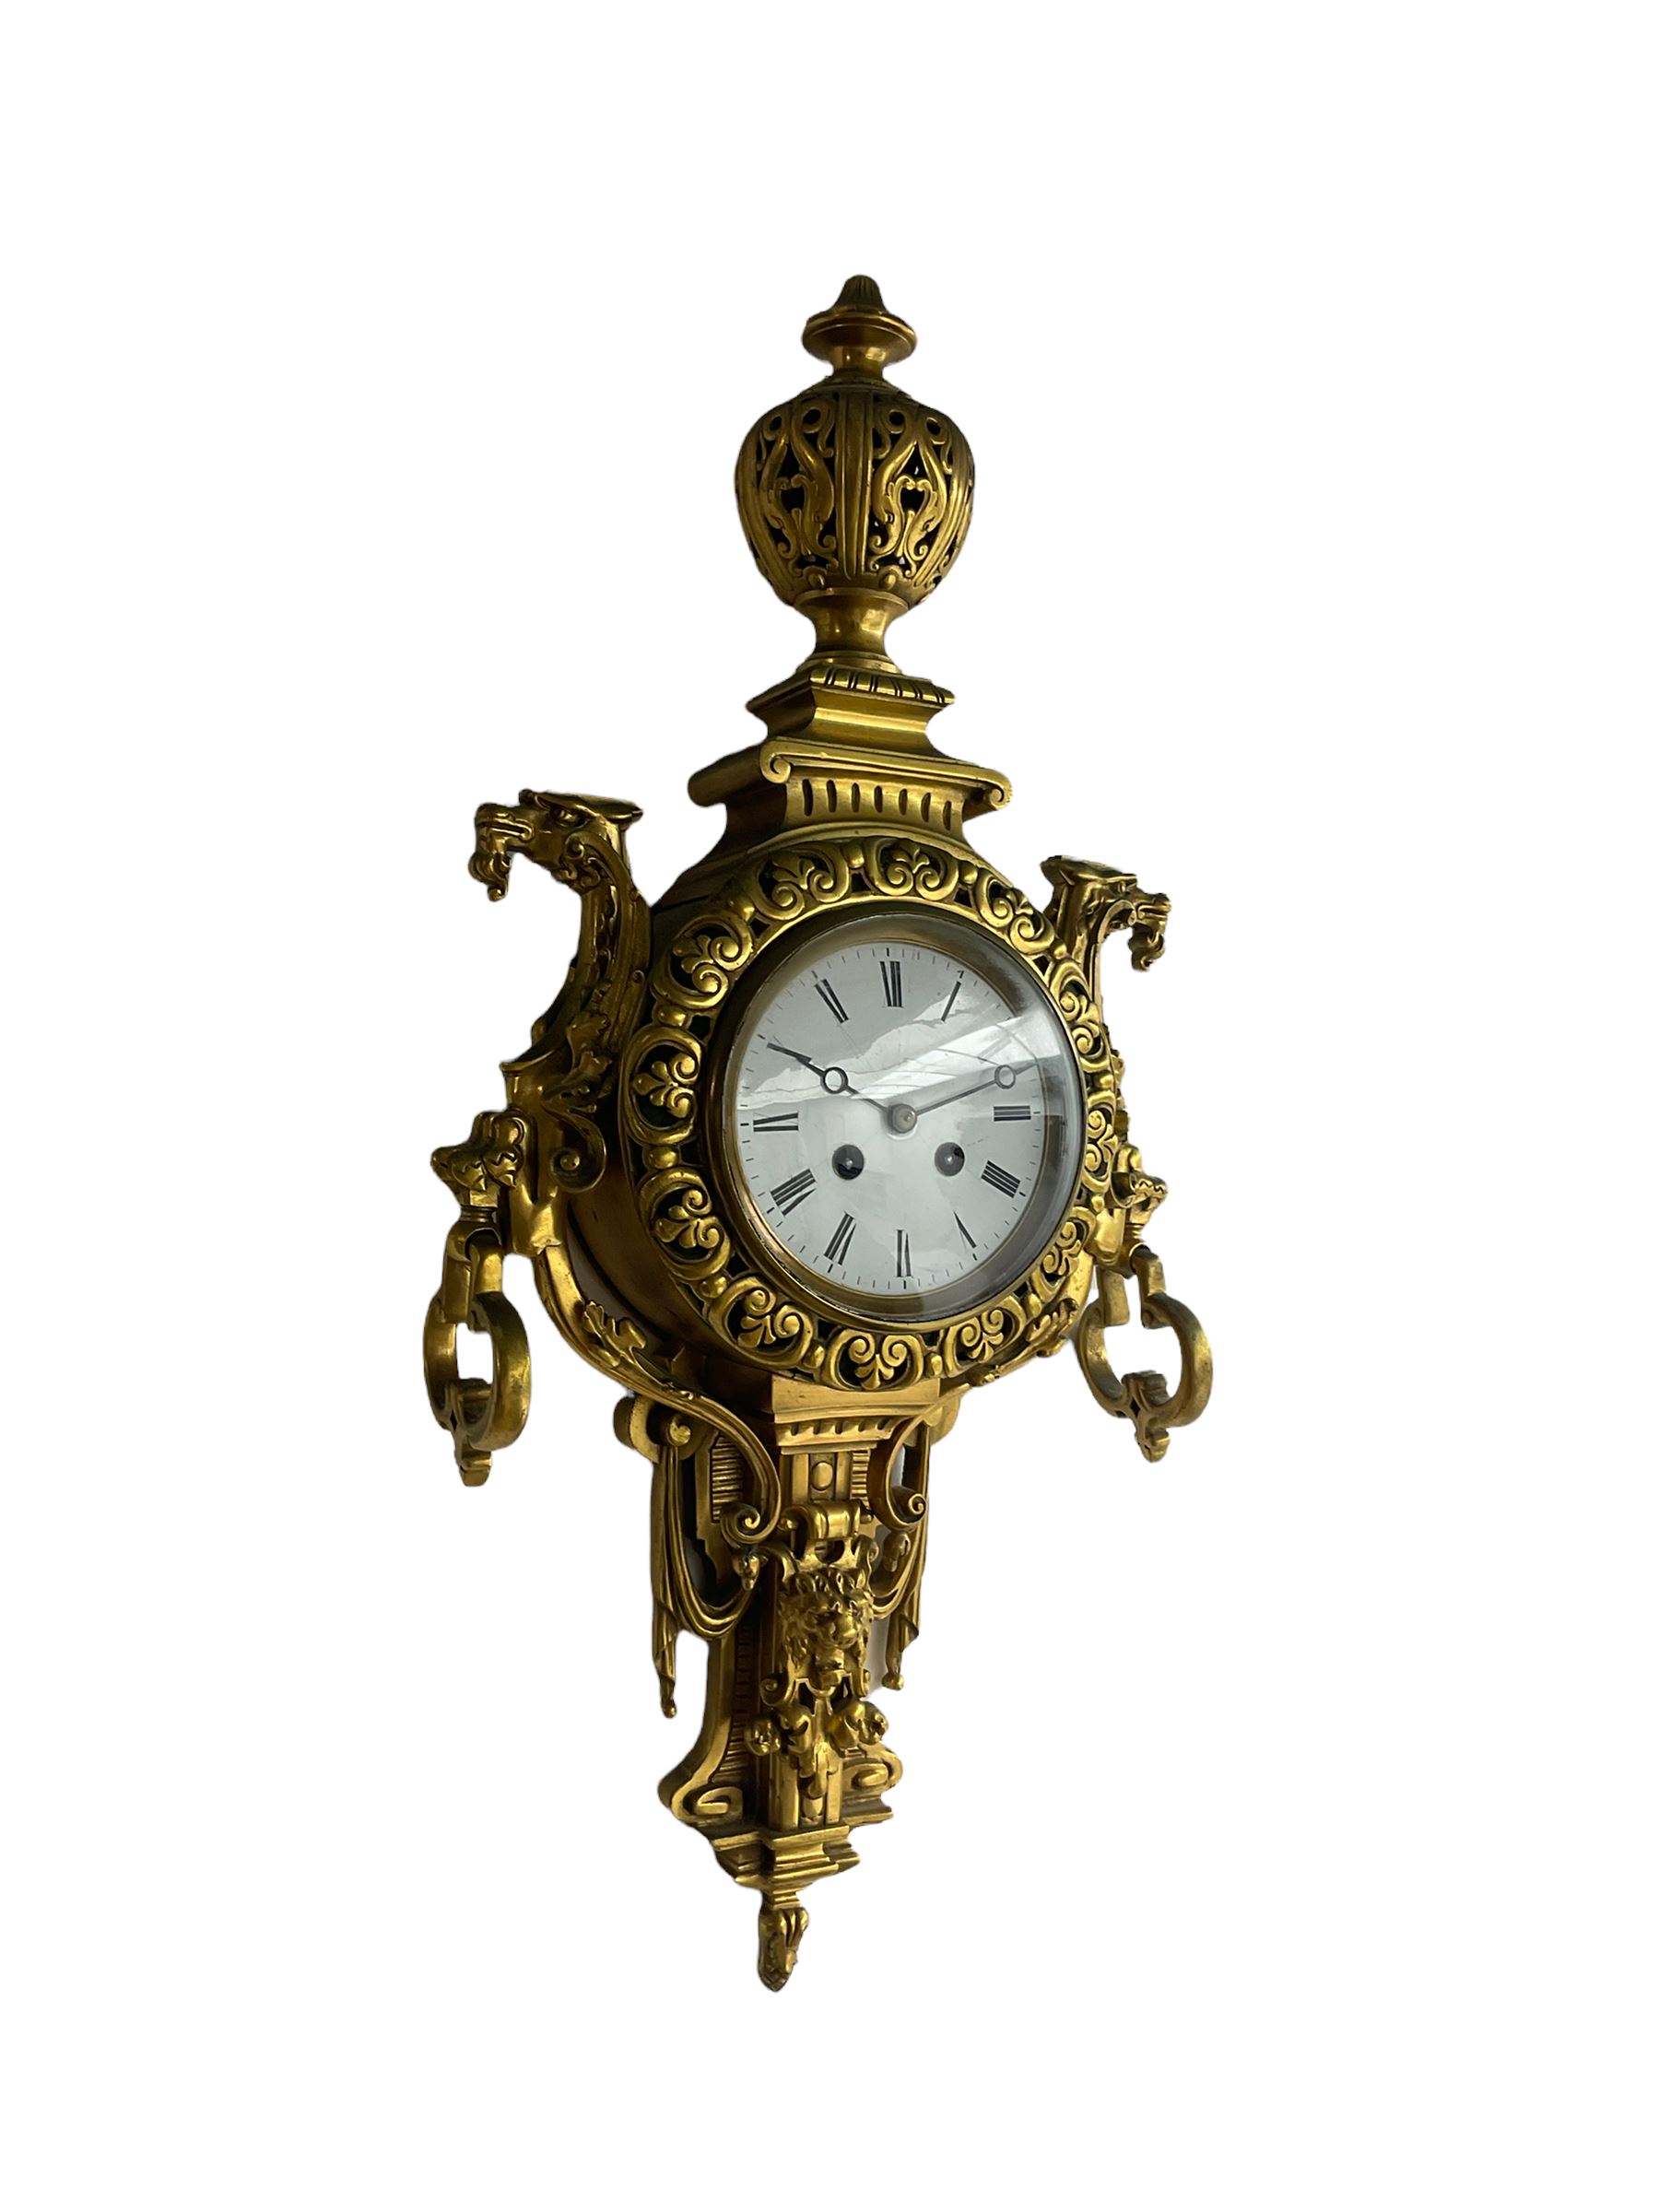 An imposing and decorative late 19th century French wall clock c1890 - Image 2 of 4